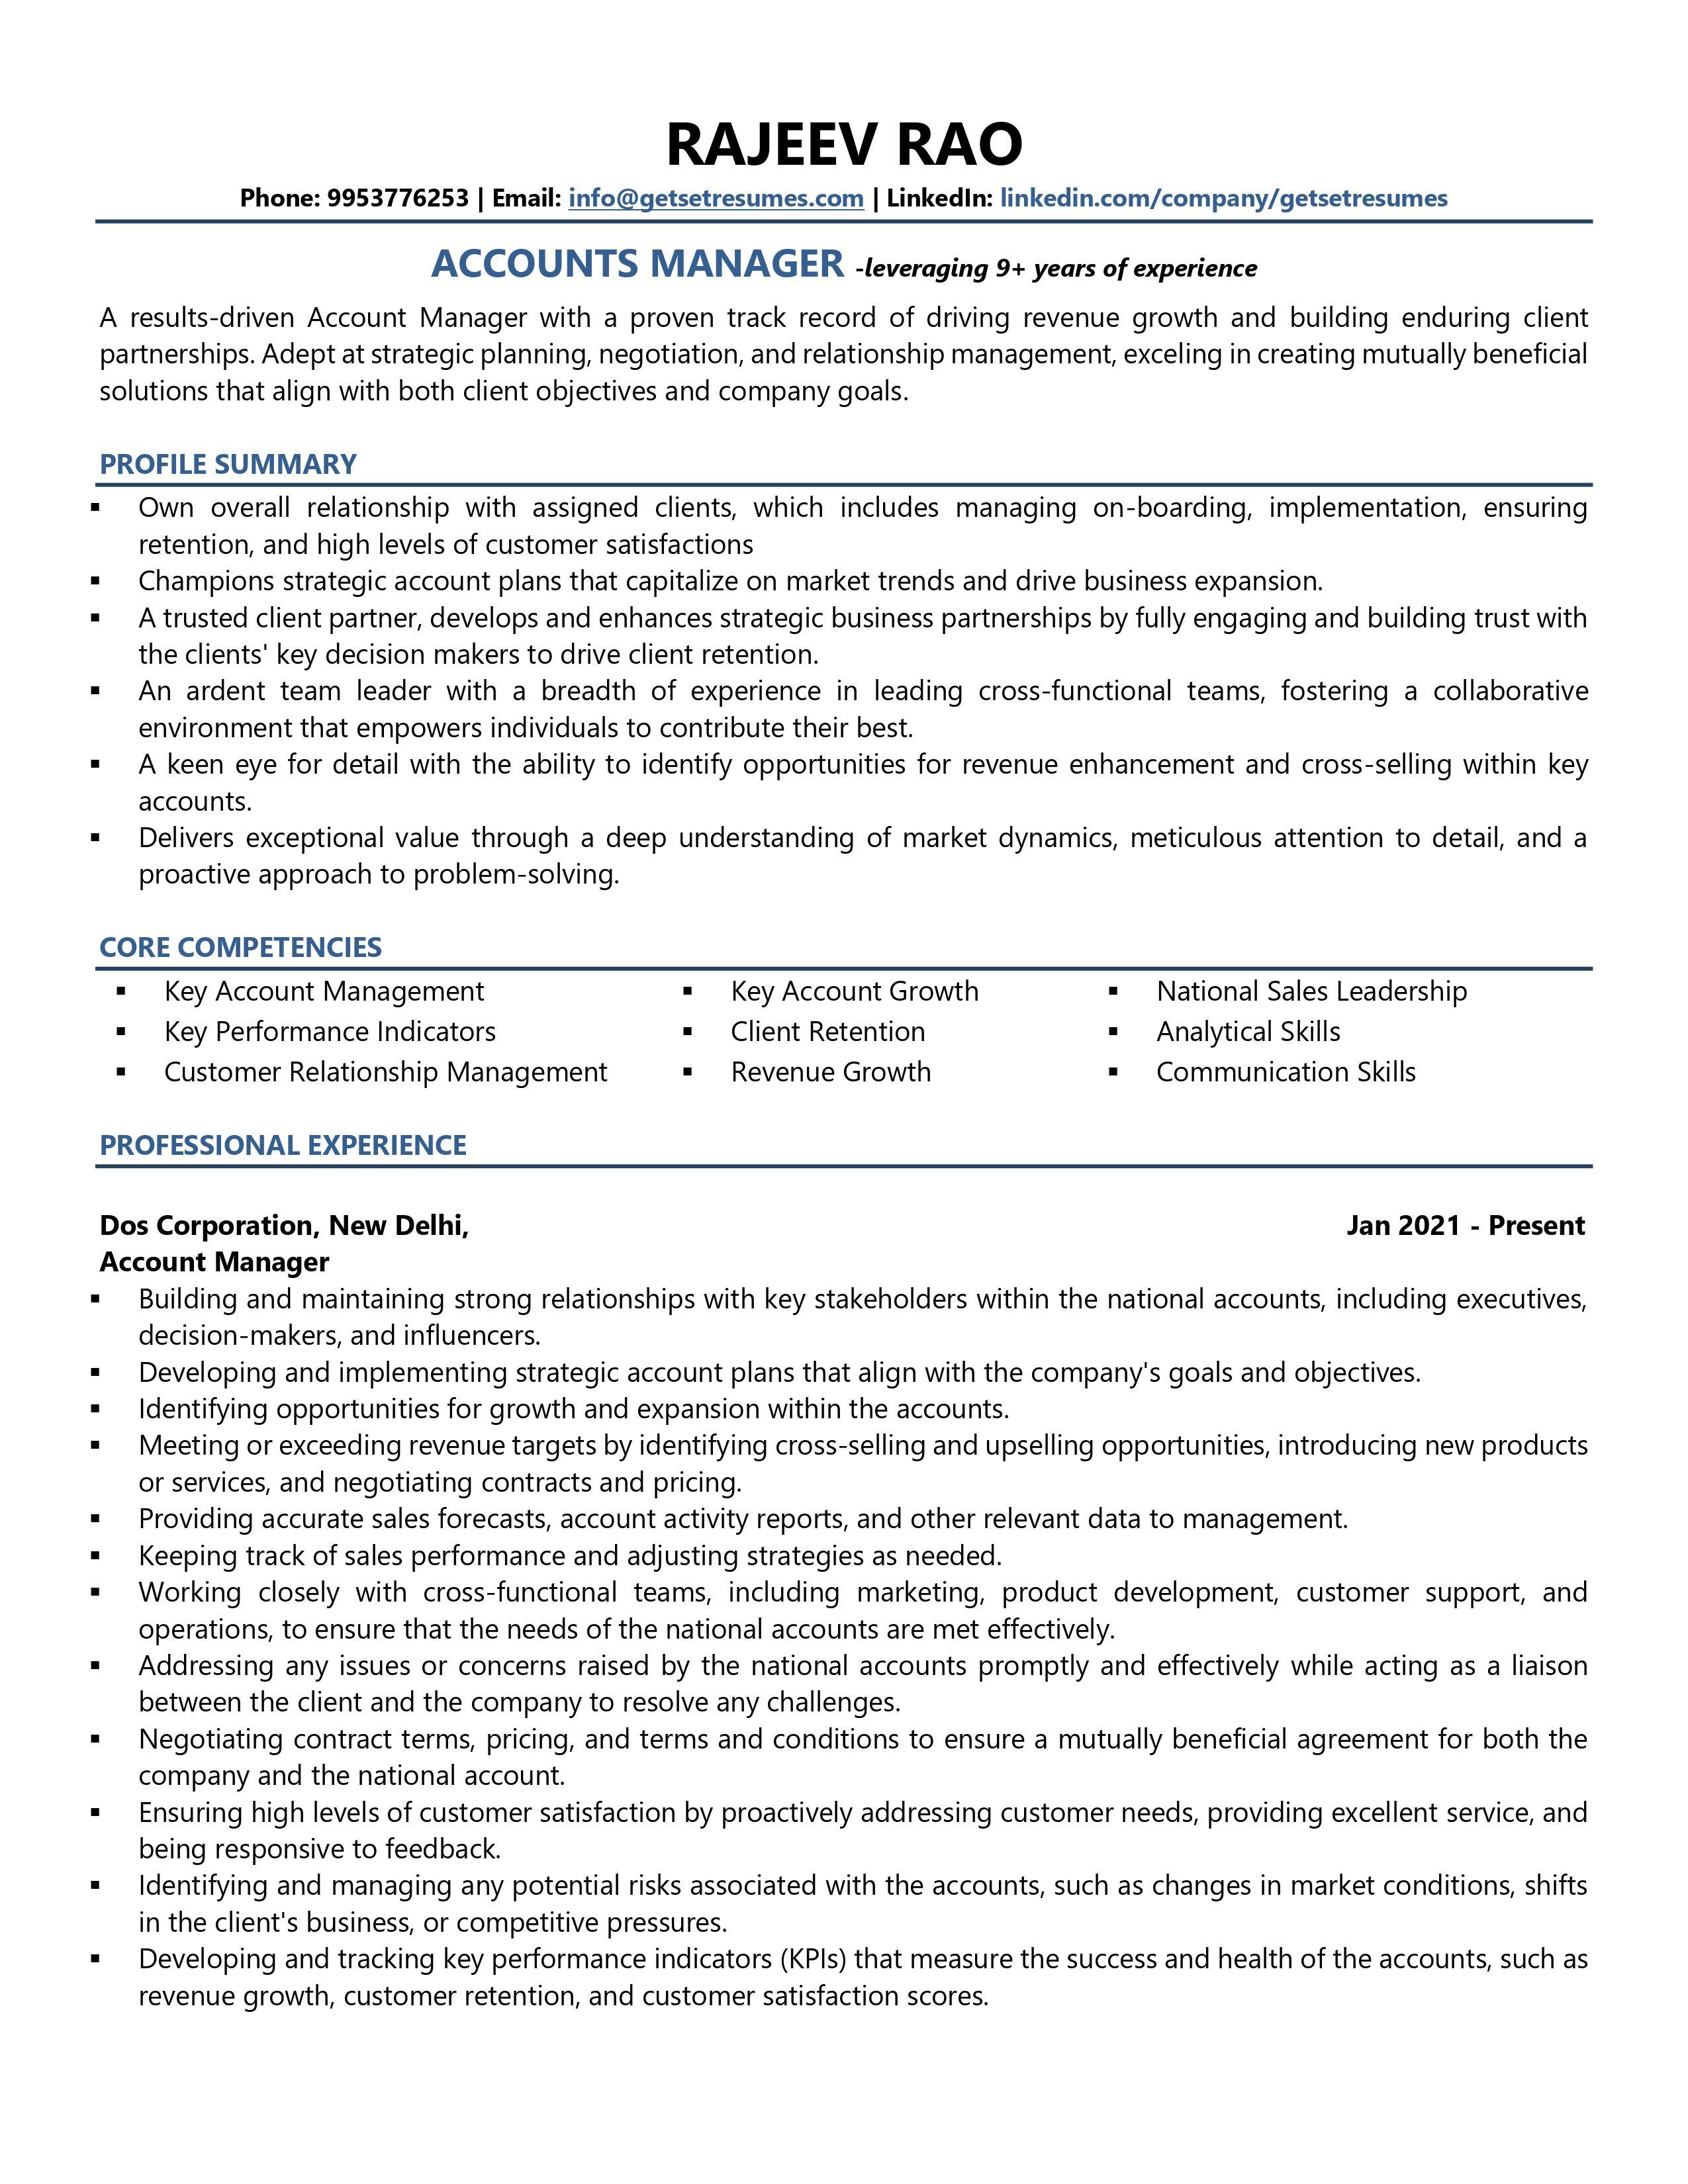 Account Manager - Resume Example & Template